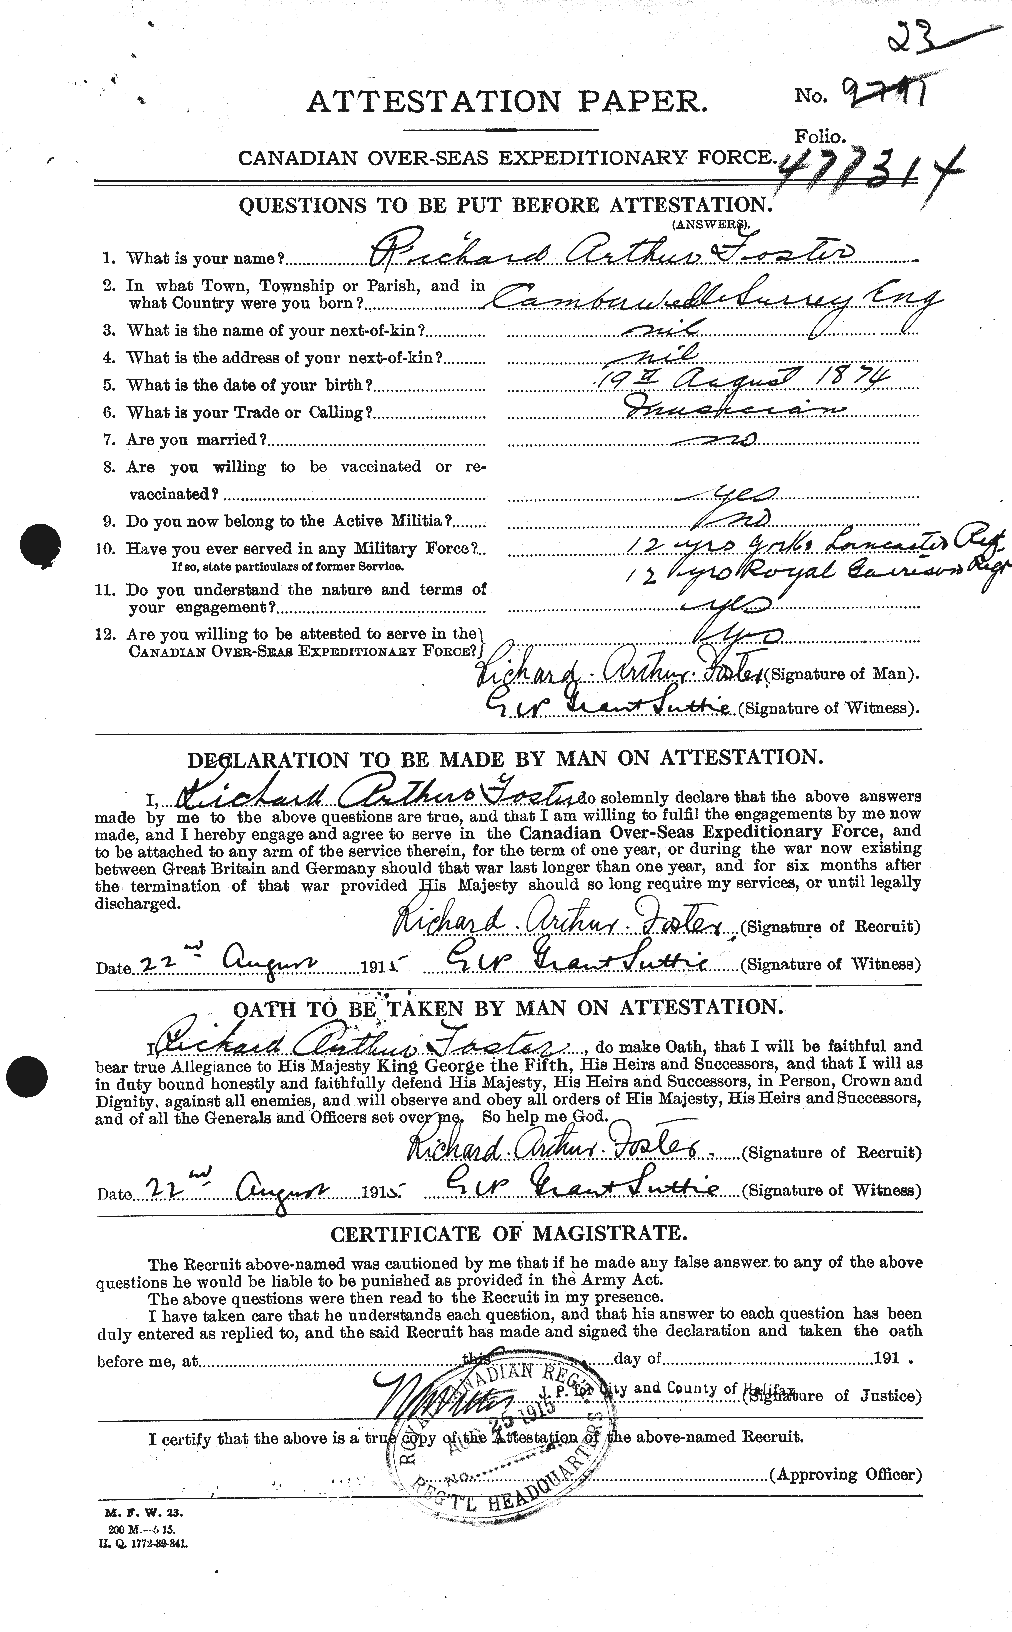 Personnel Records of the First World War - CEF 335161a